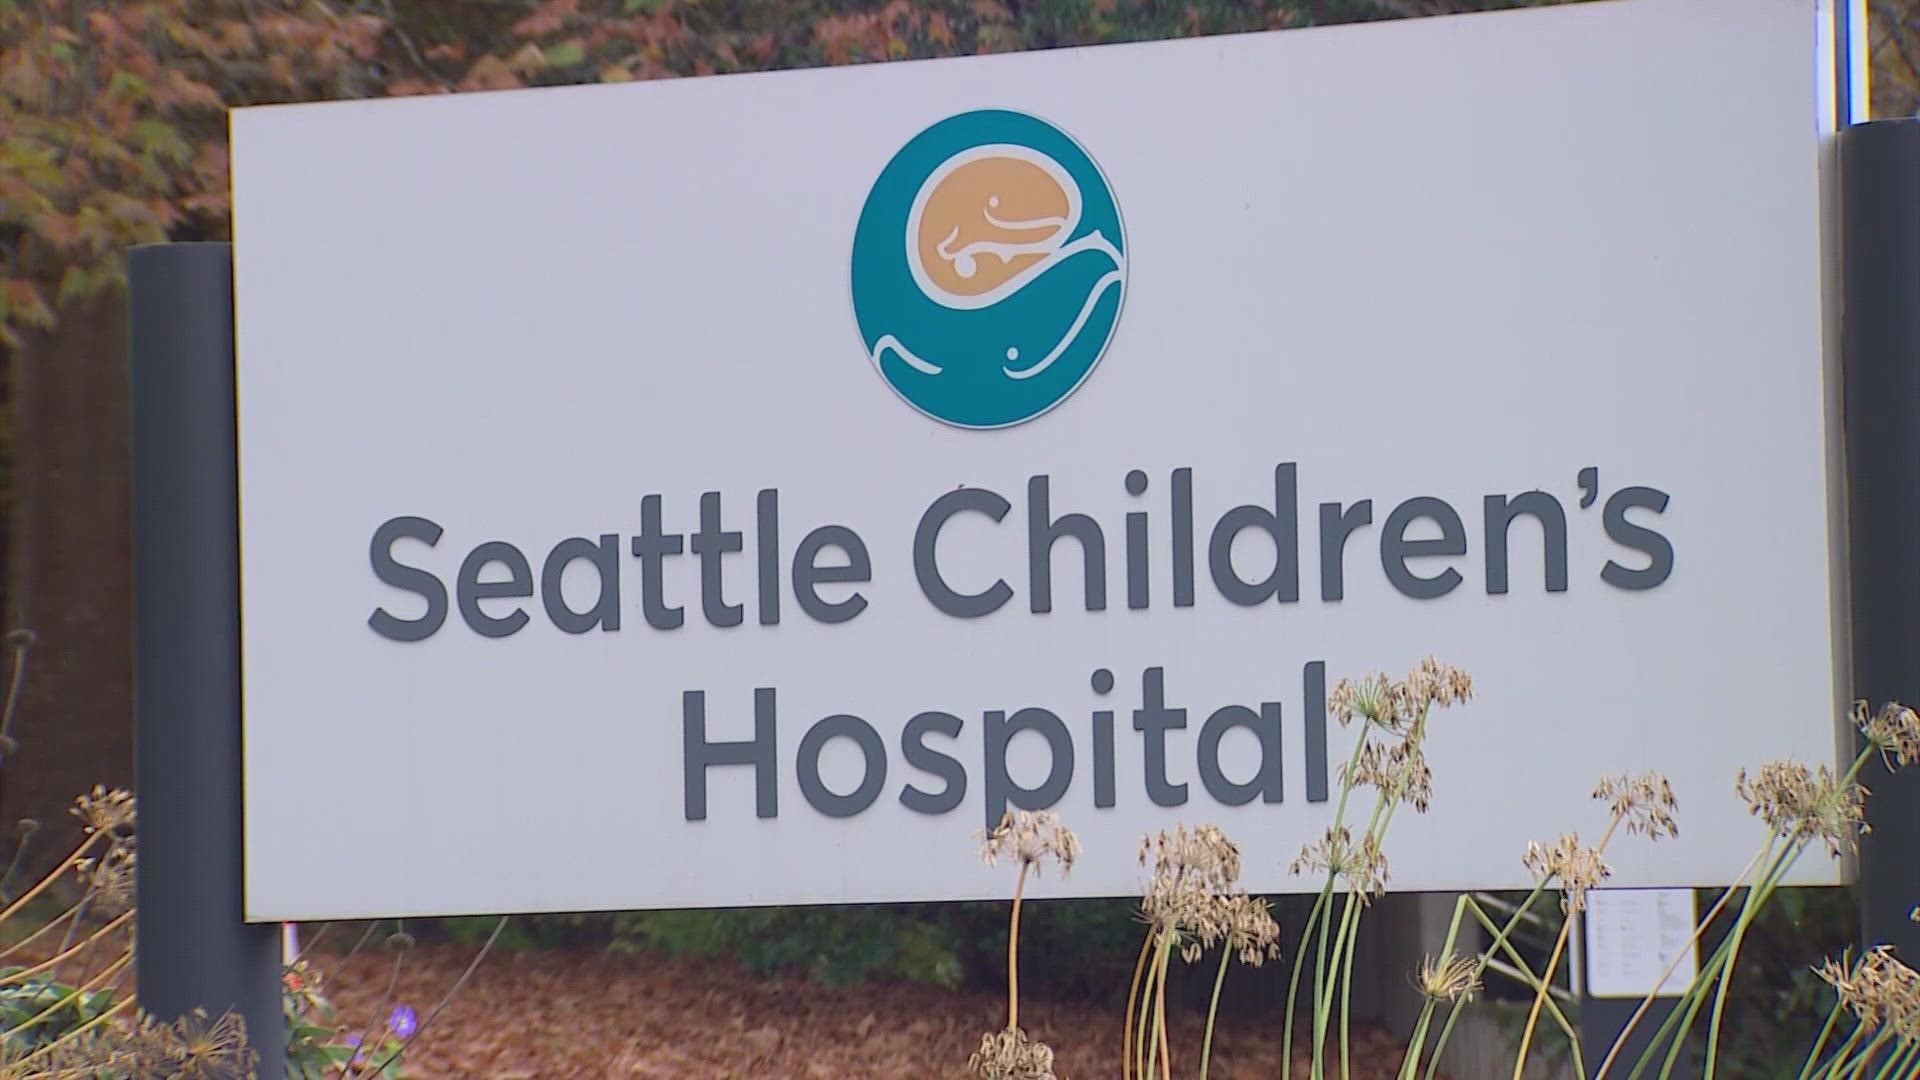 Nurses at Seattle Children’s hospital approved a contract agreement Thursday that increases pay for entry-level nurses by nearly 50%.